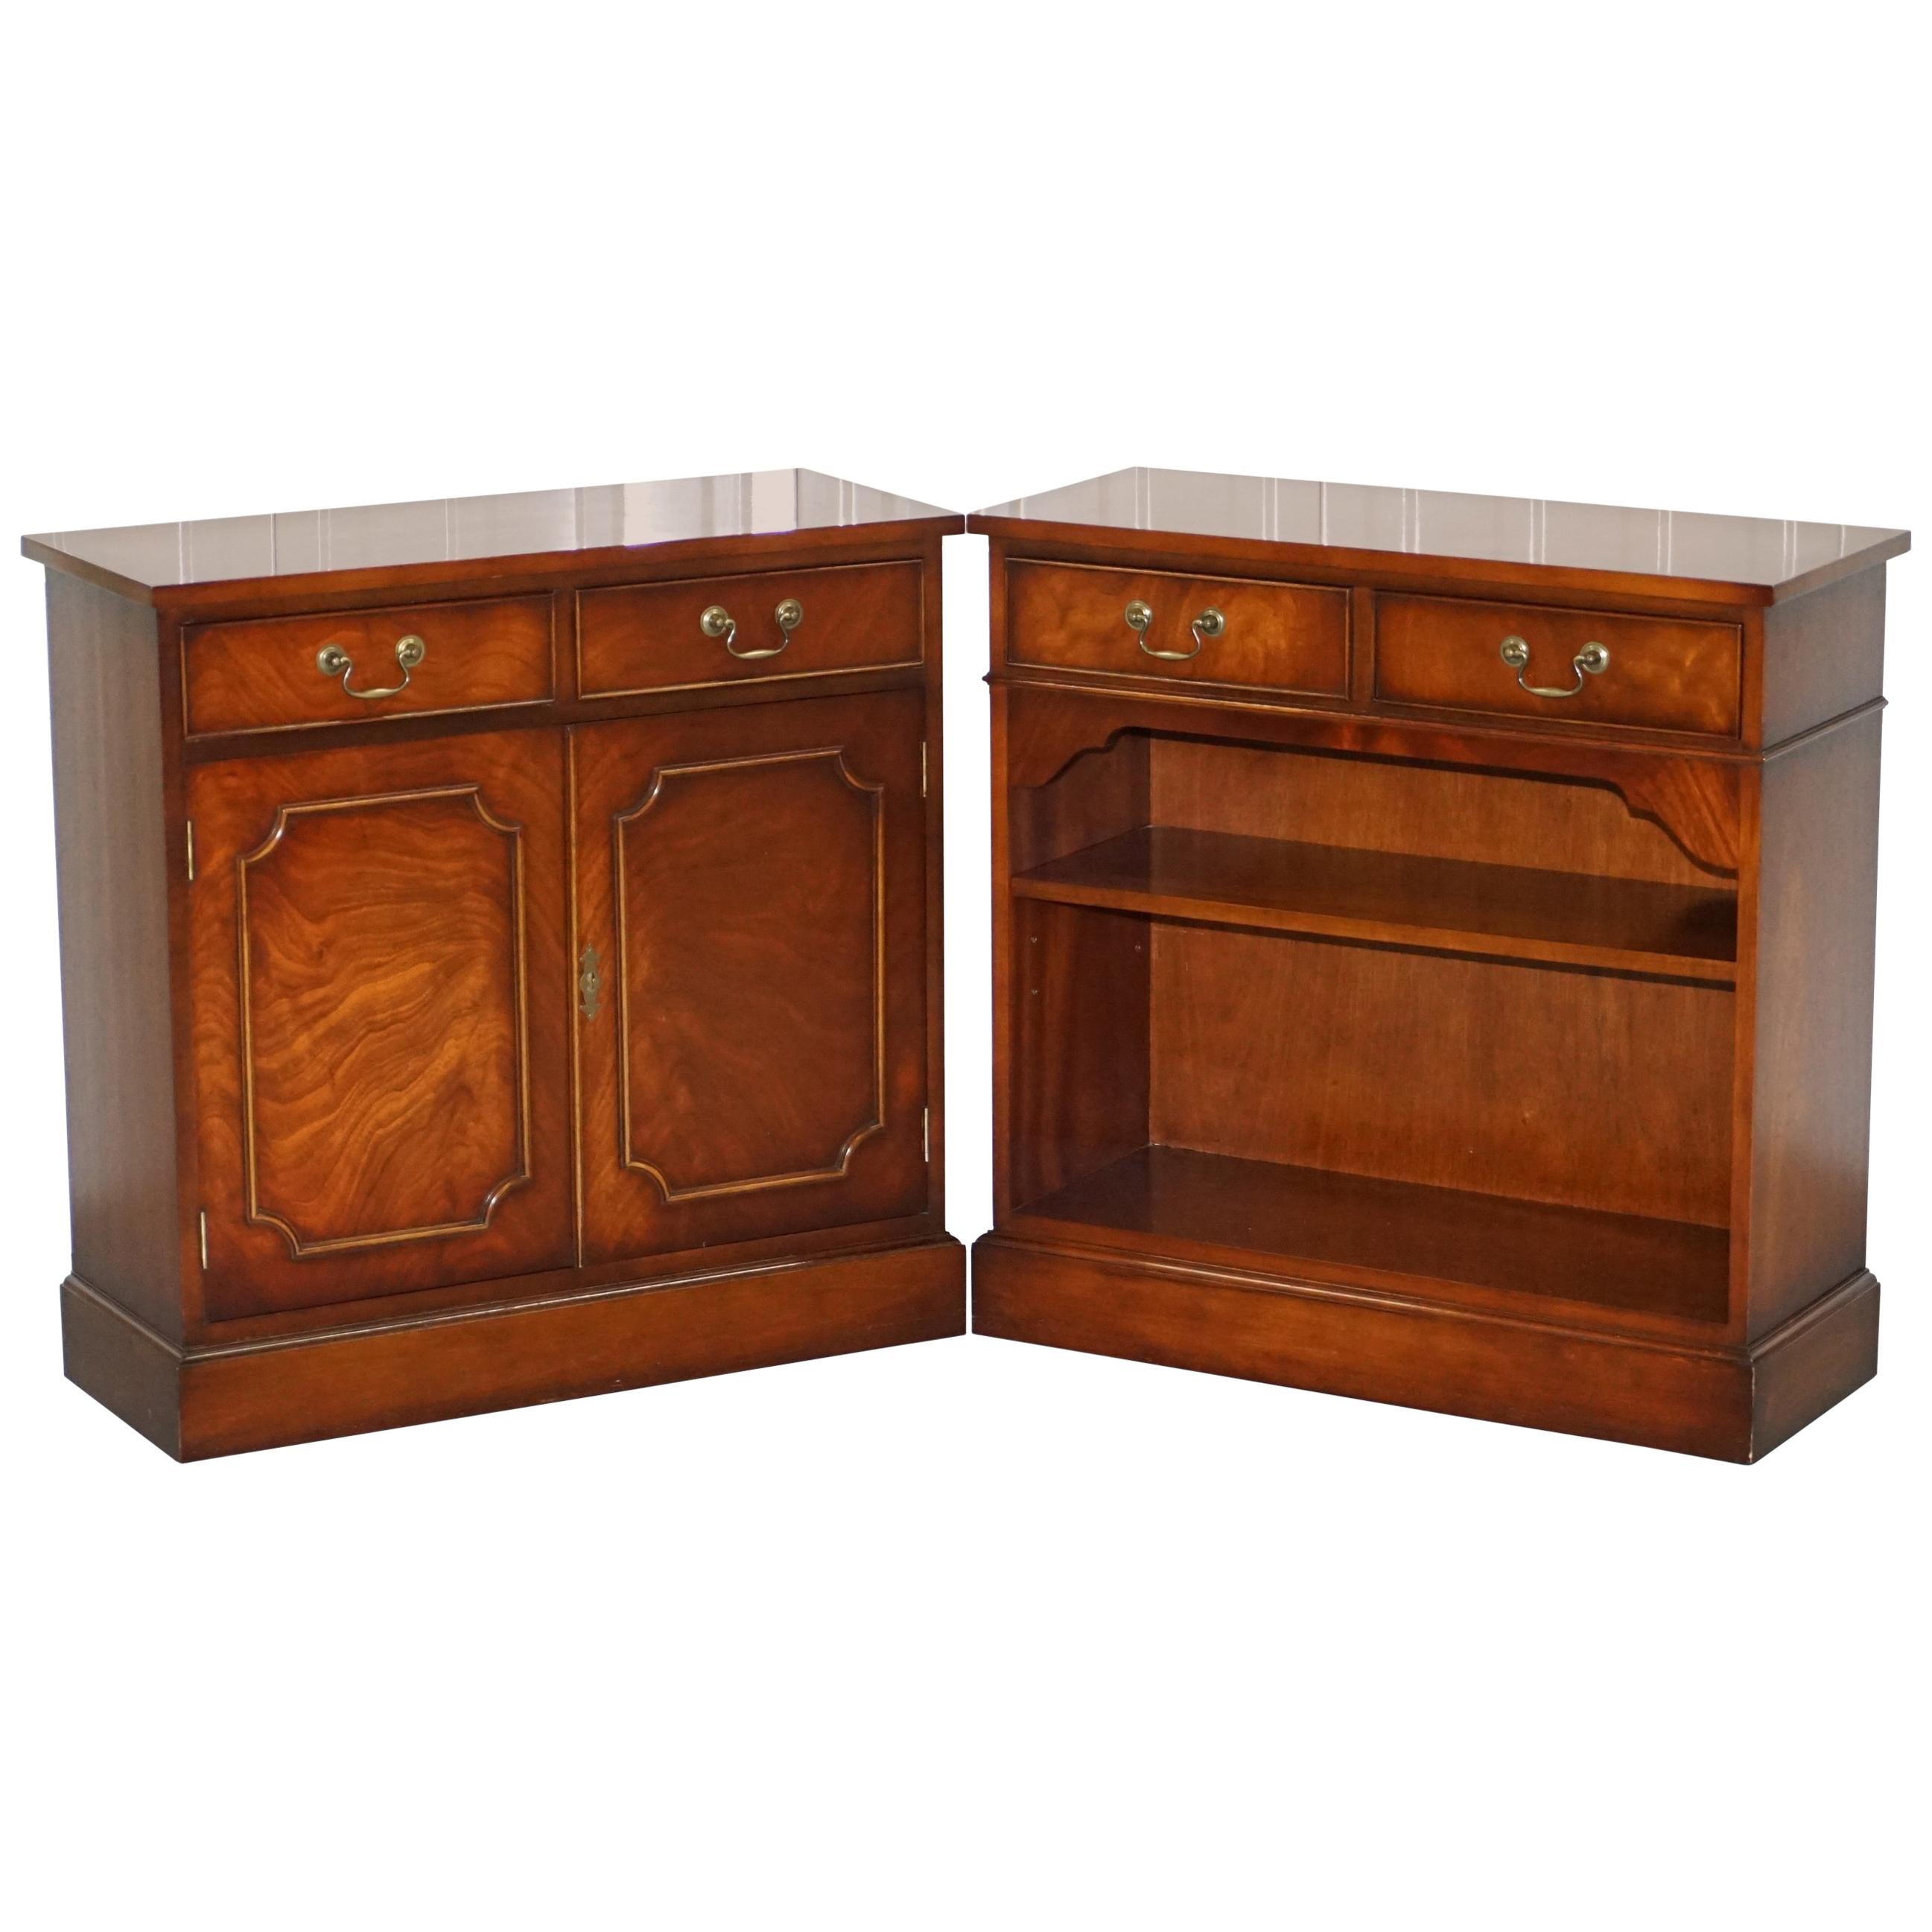 Pair of Yew Wood Bradley Furniture England Bookcases Cabinet Drawers